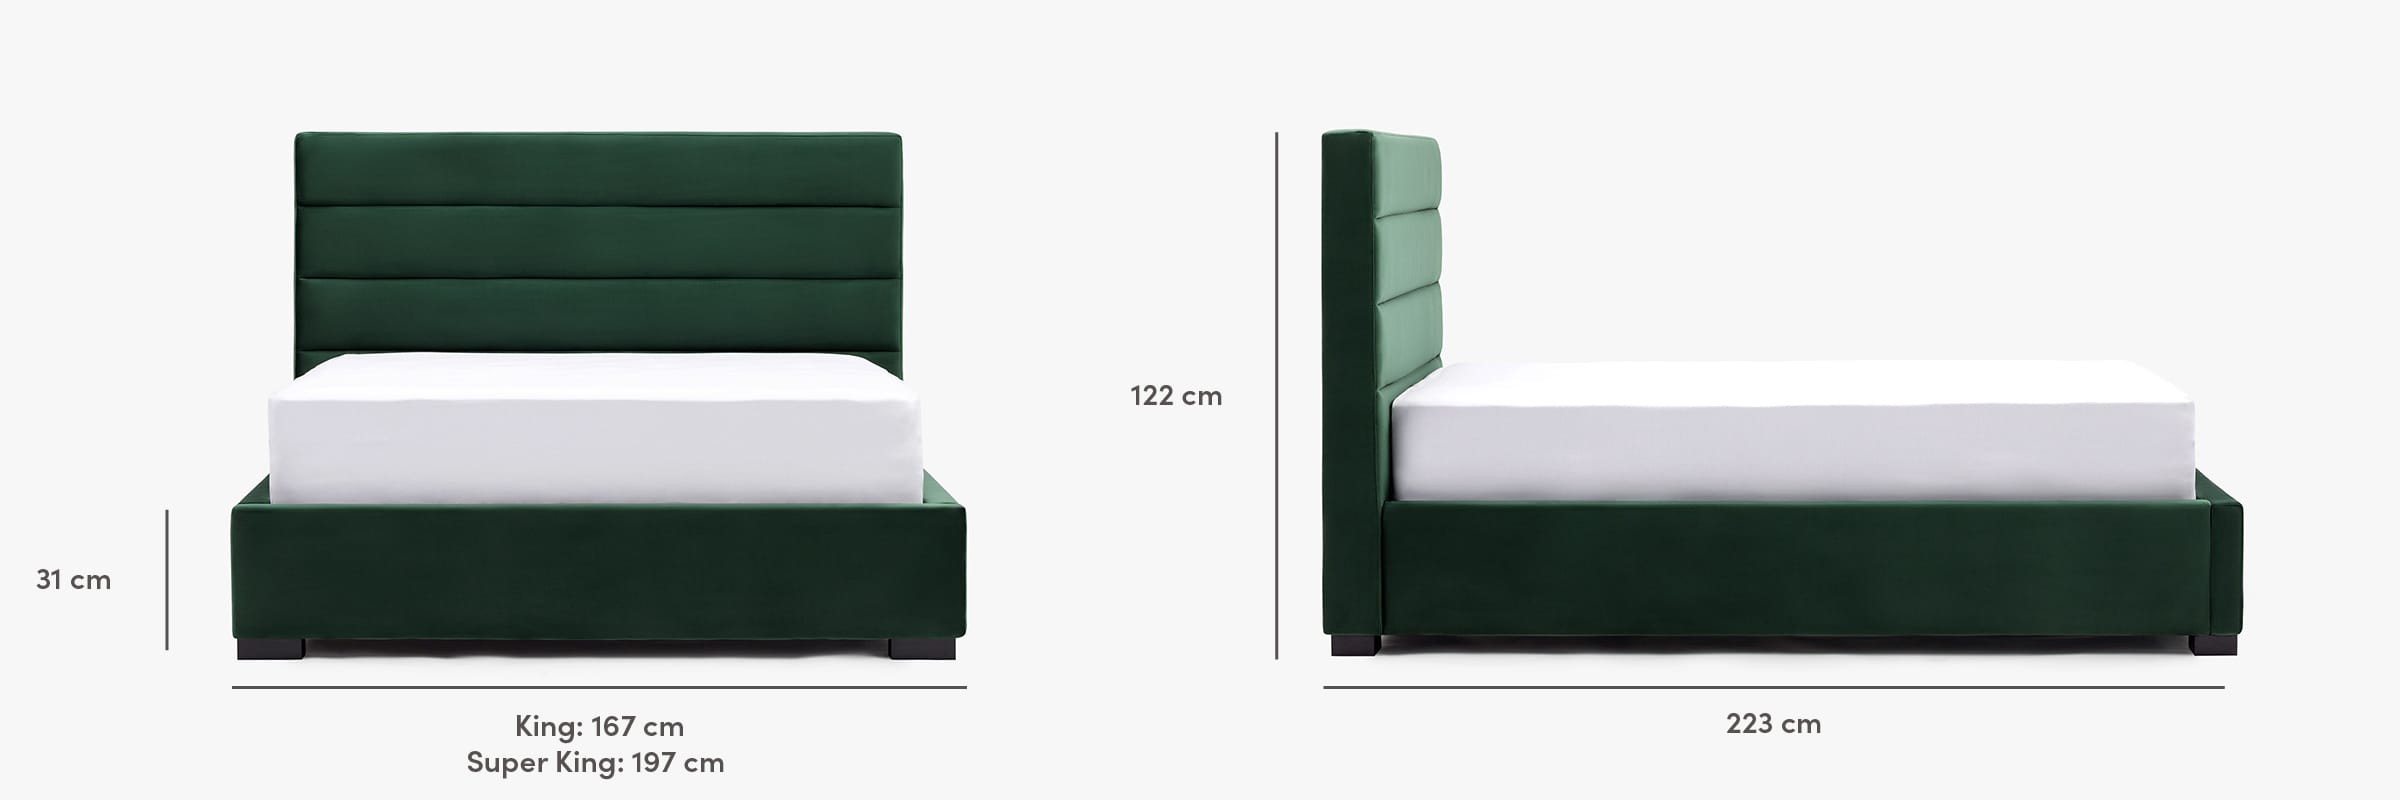 The oxford bed dimensions